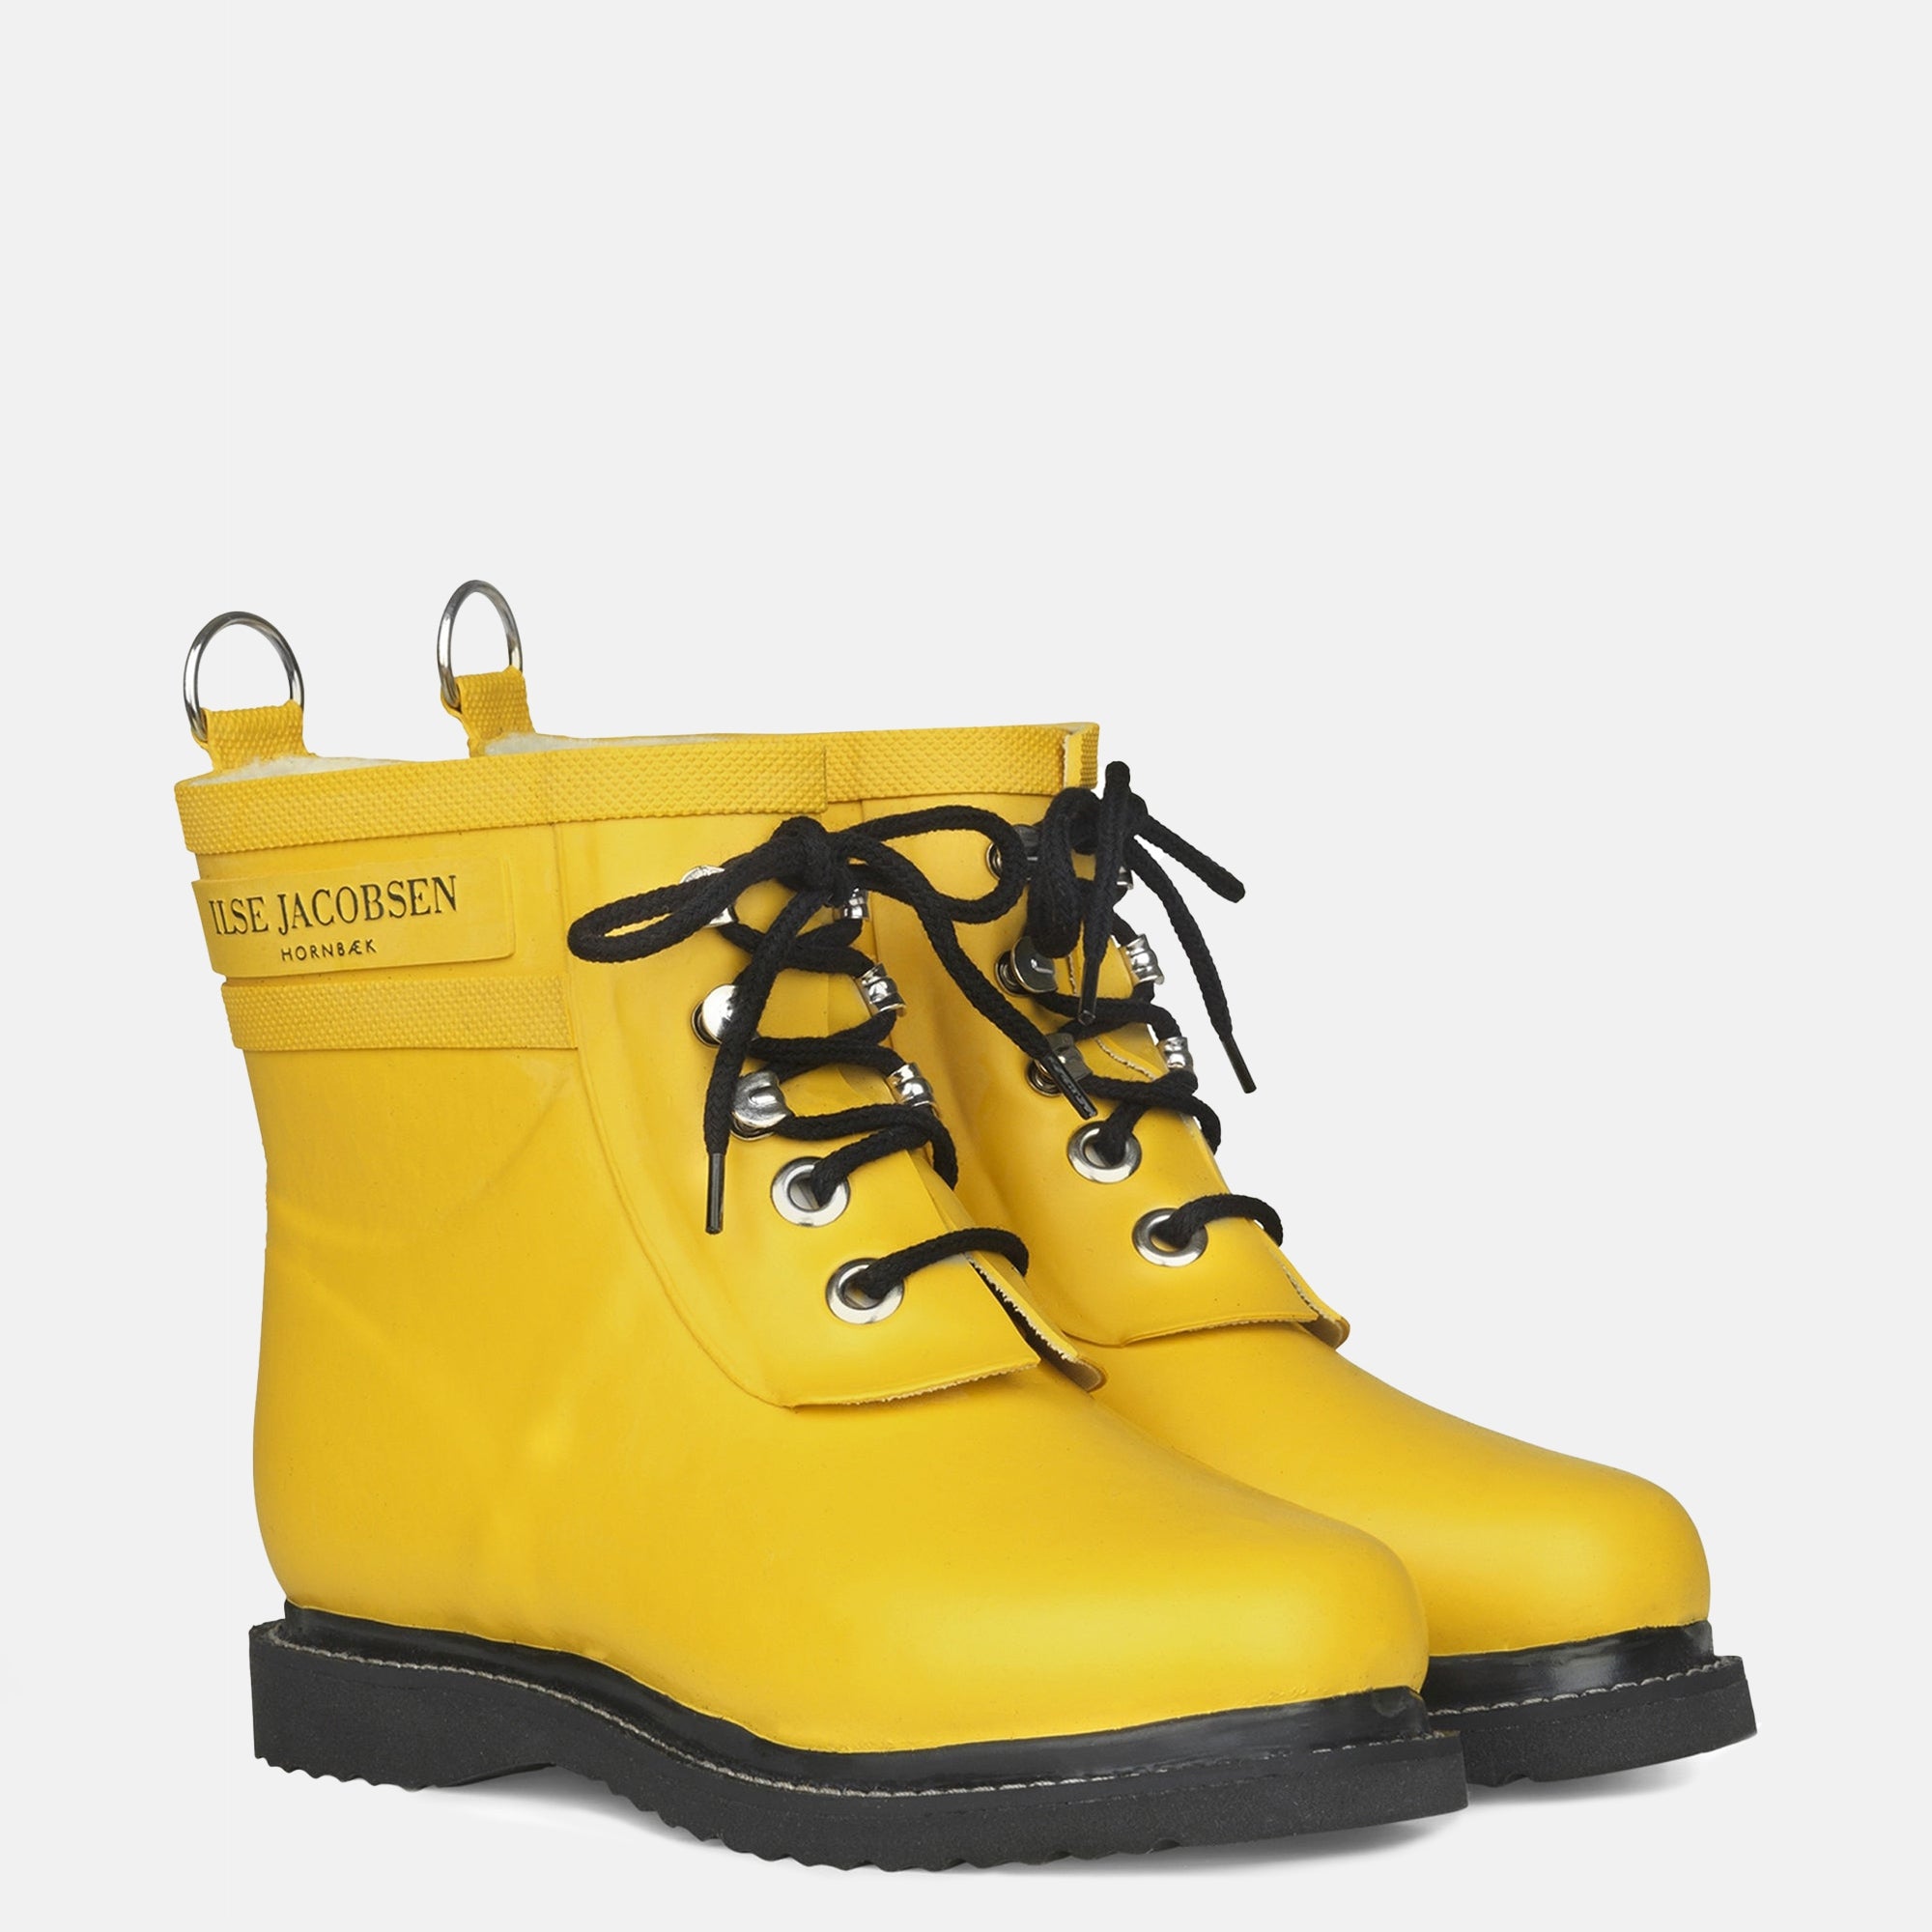 Short Rubber Boots RUB2 - 808 Cyber Yellow | Cyber Yellow